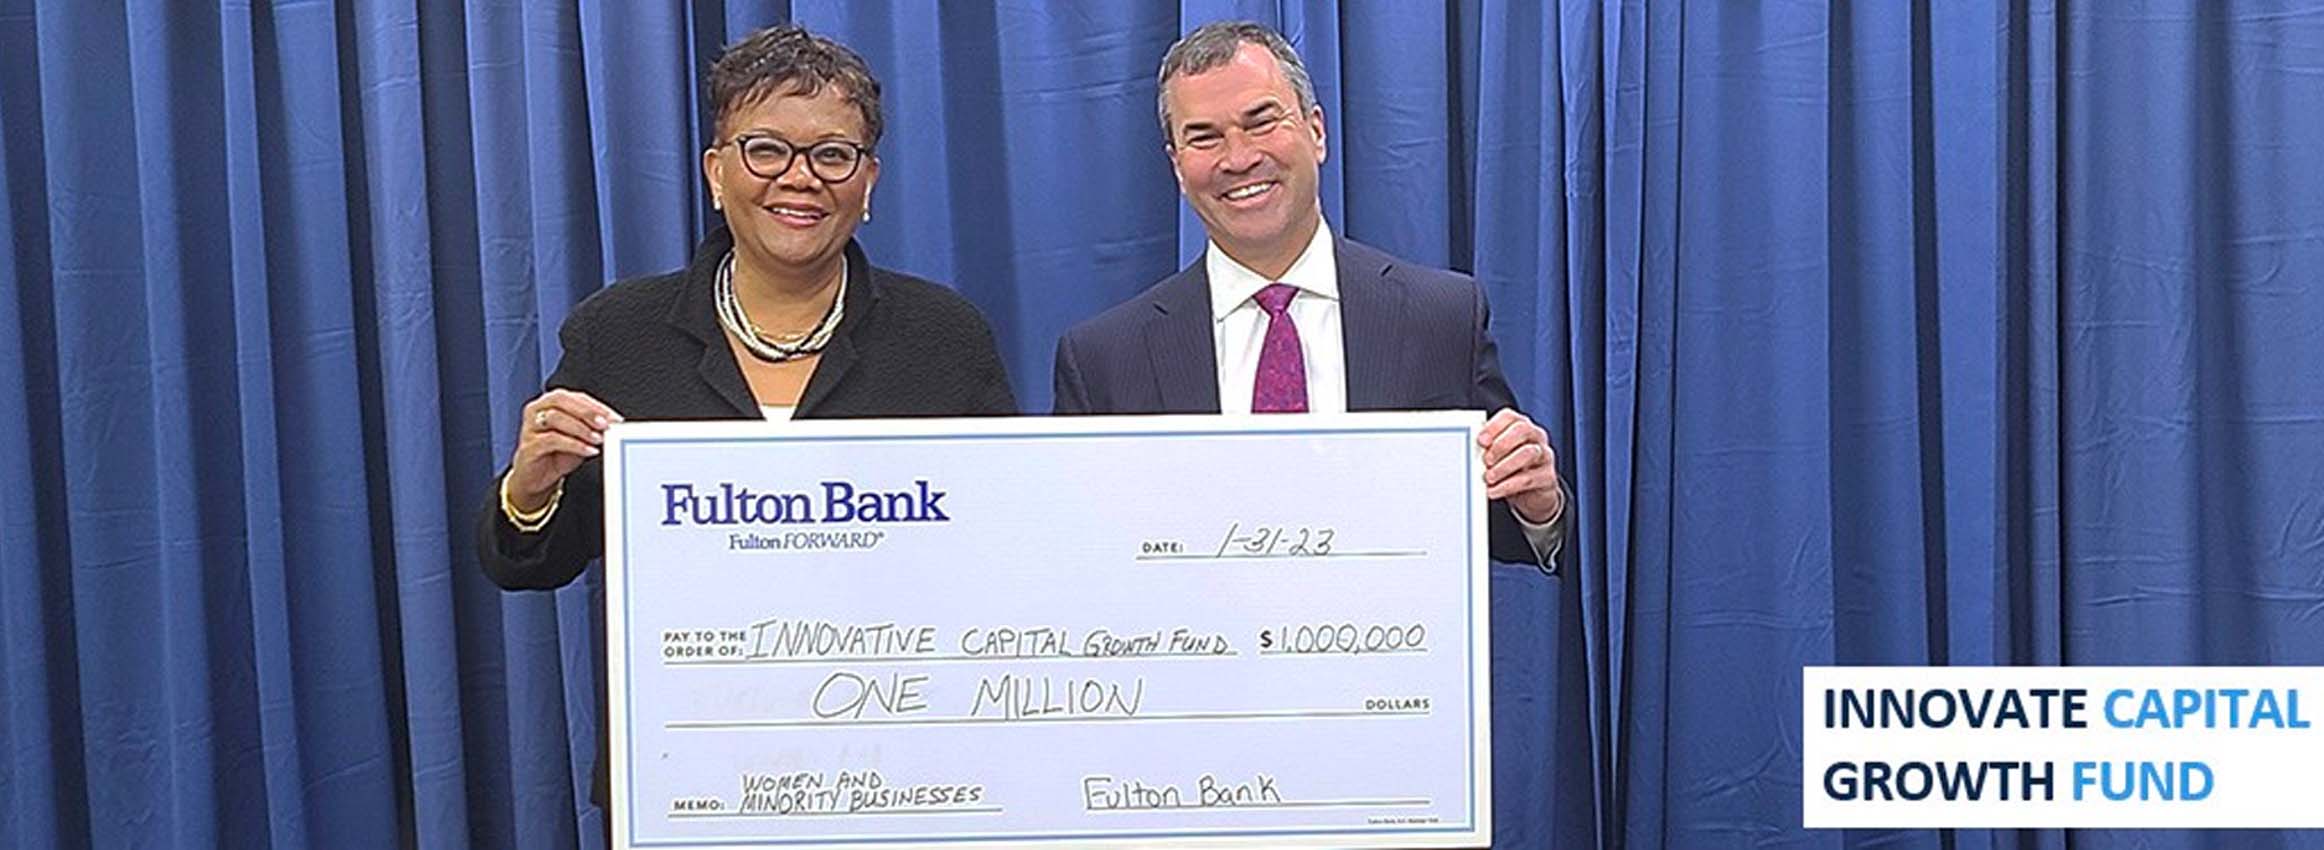 Fulton Bank Invests $1 Million in Fund for Minority- and Women-Owned Businesses